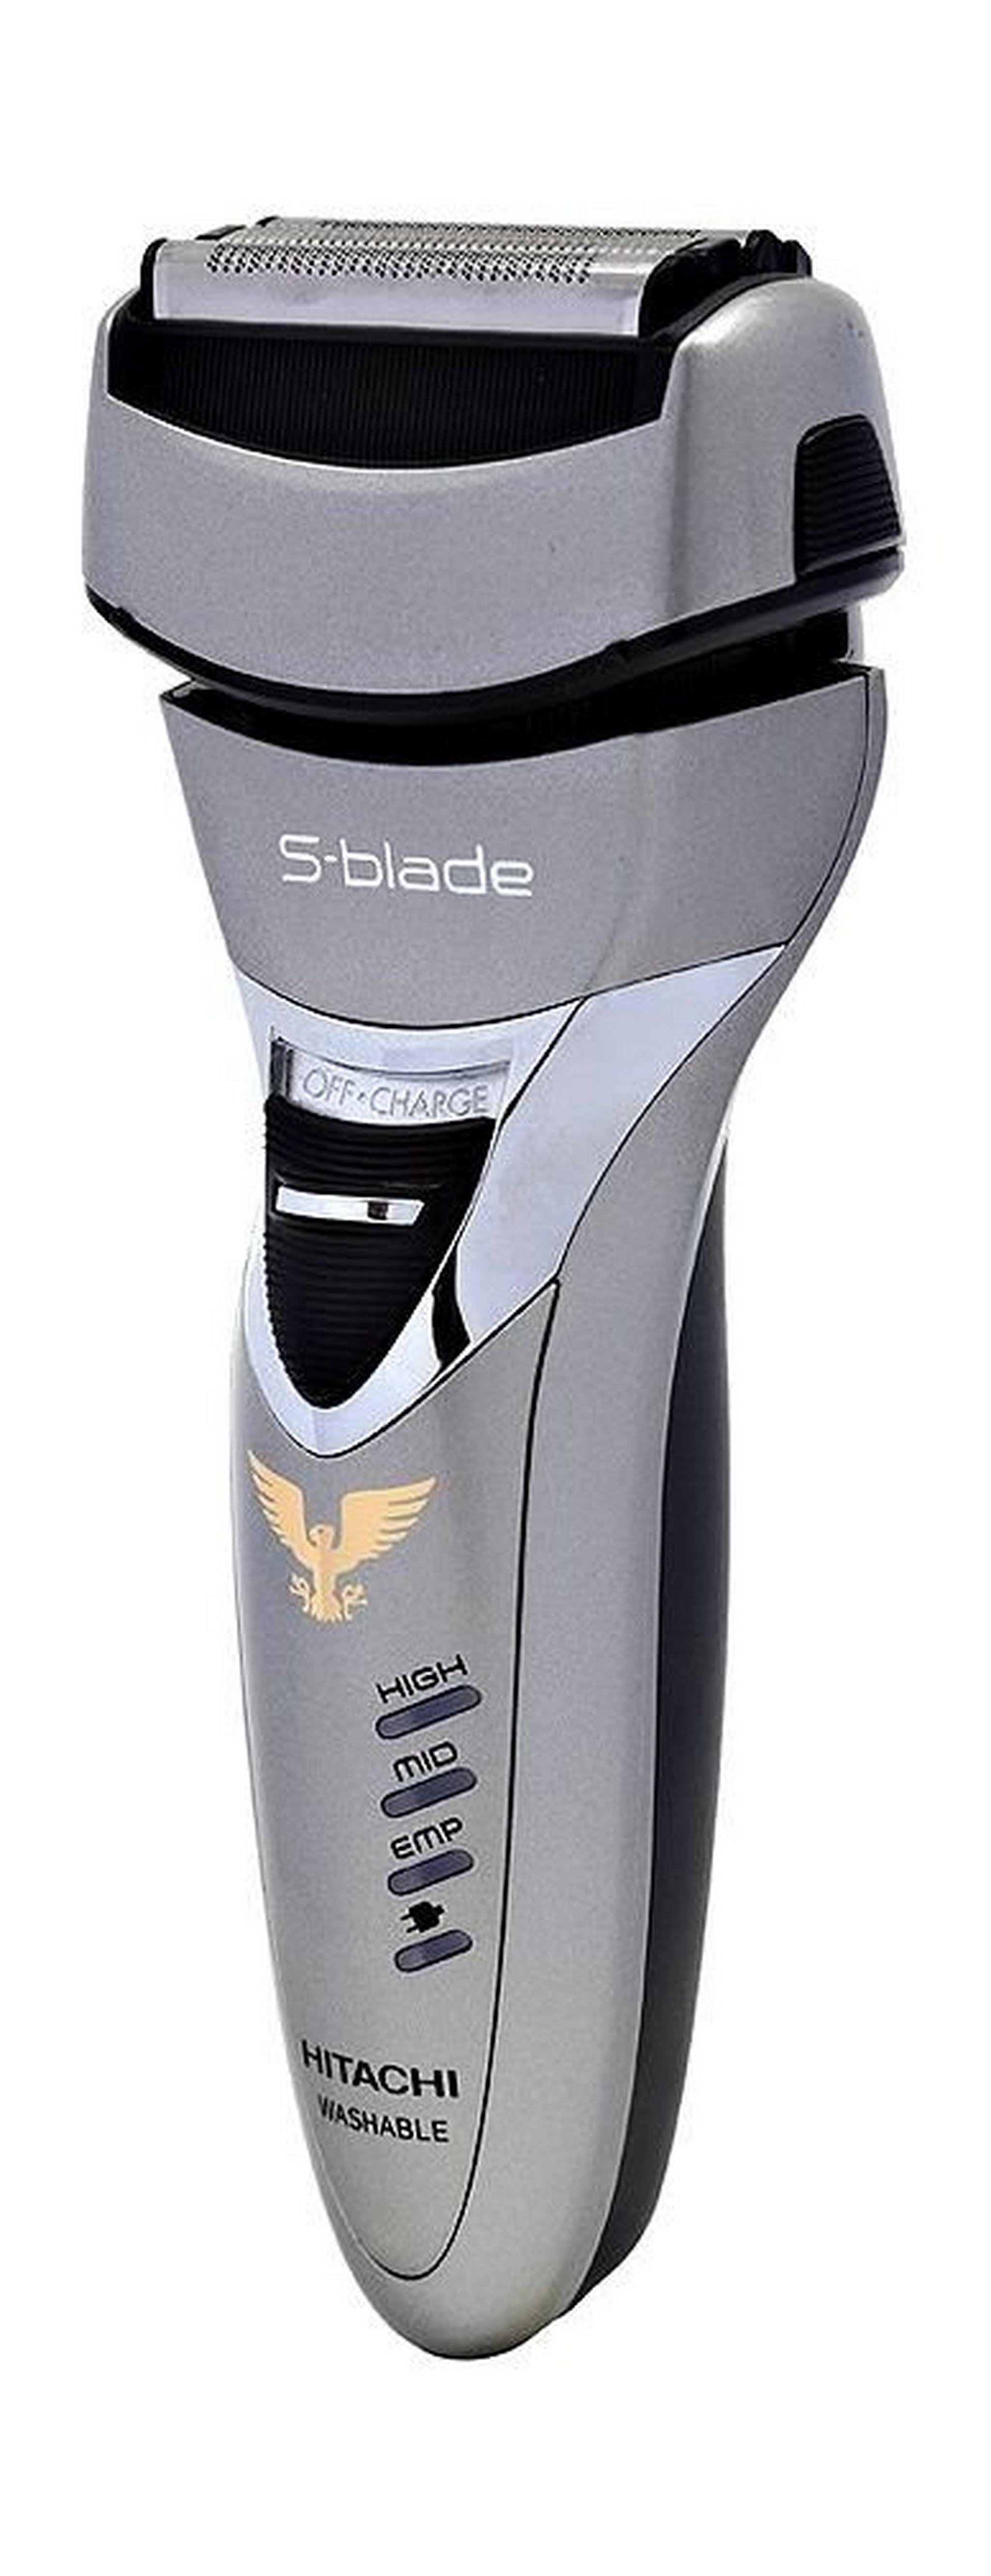 Hitachi S-Blade 4-Blade Rechargeable Shaver RMF4400BF